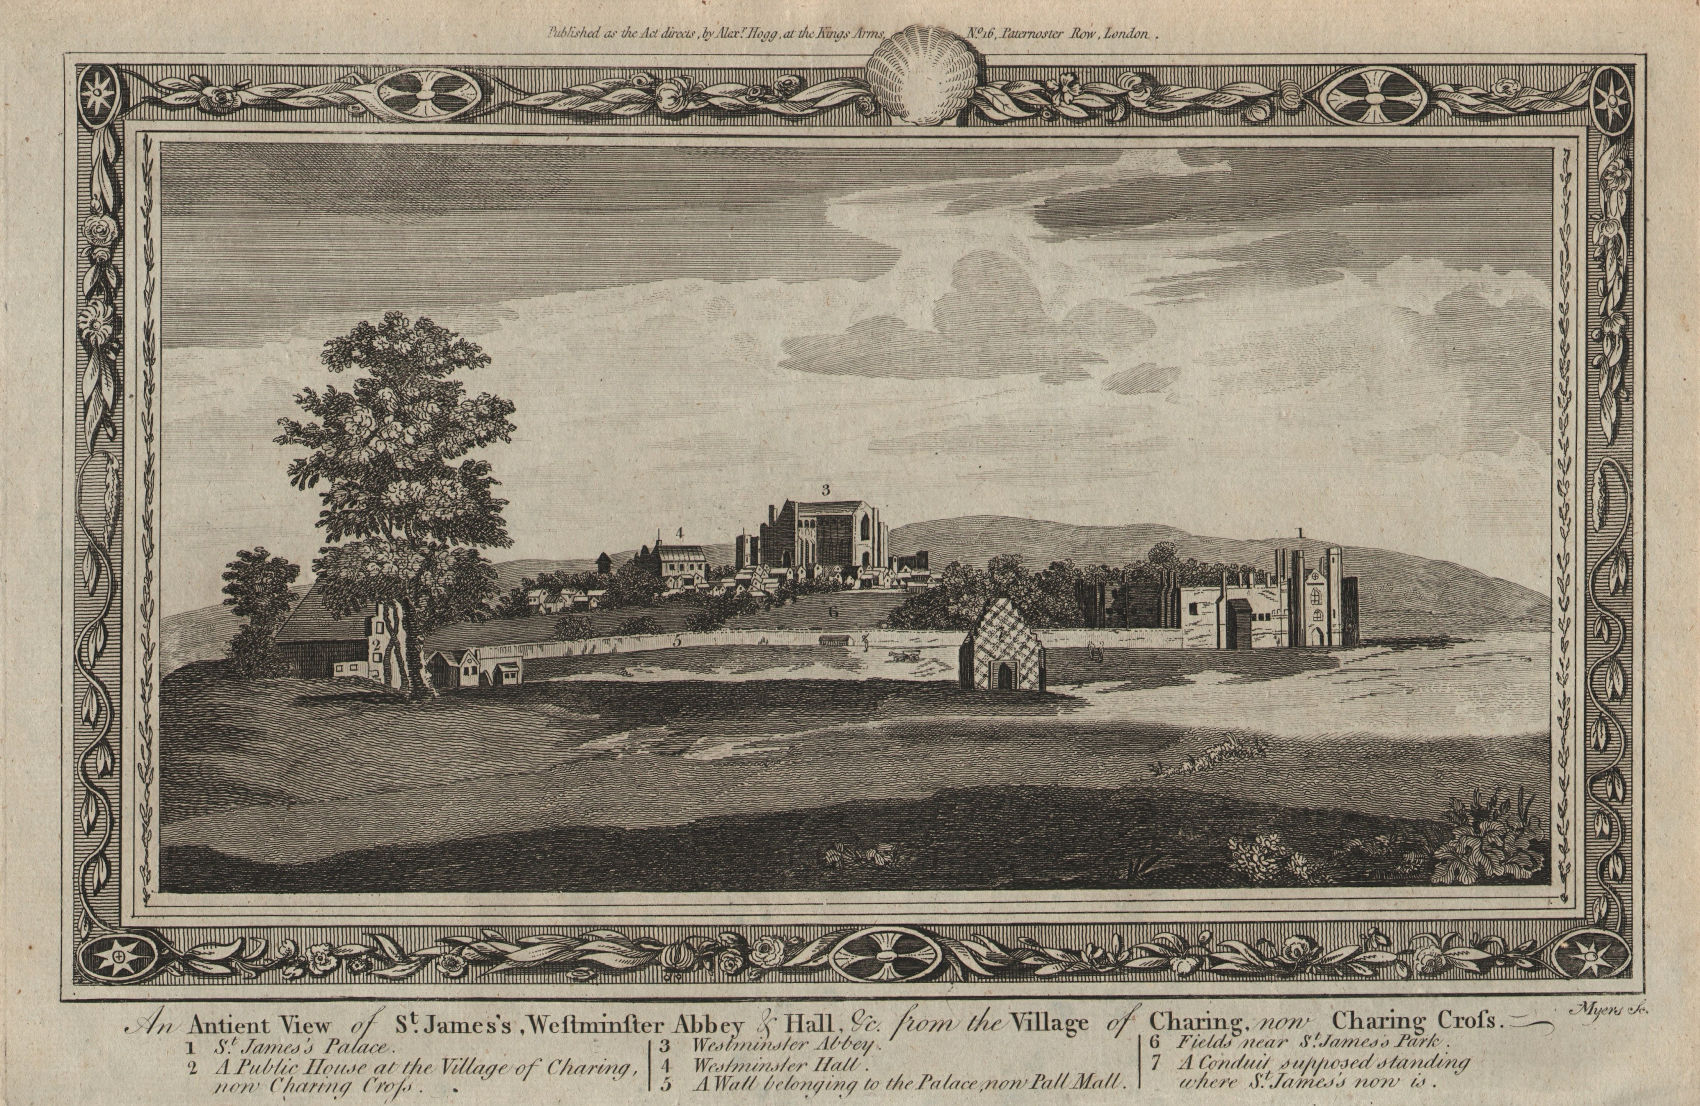 Associate Product Ancient view of St James's & Westminster from Charing [Cross]. THORNTON 1784